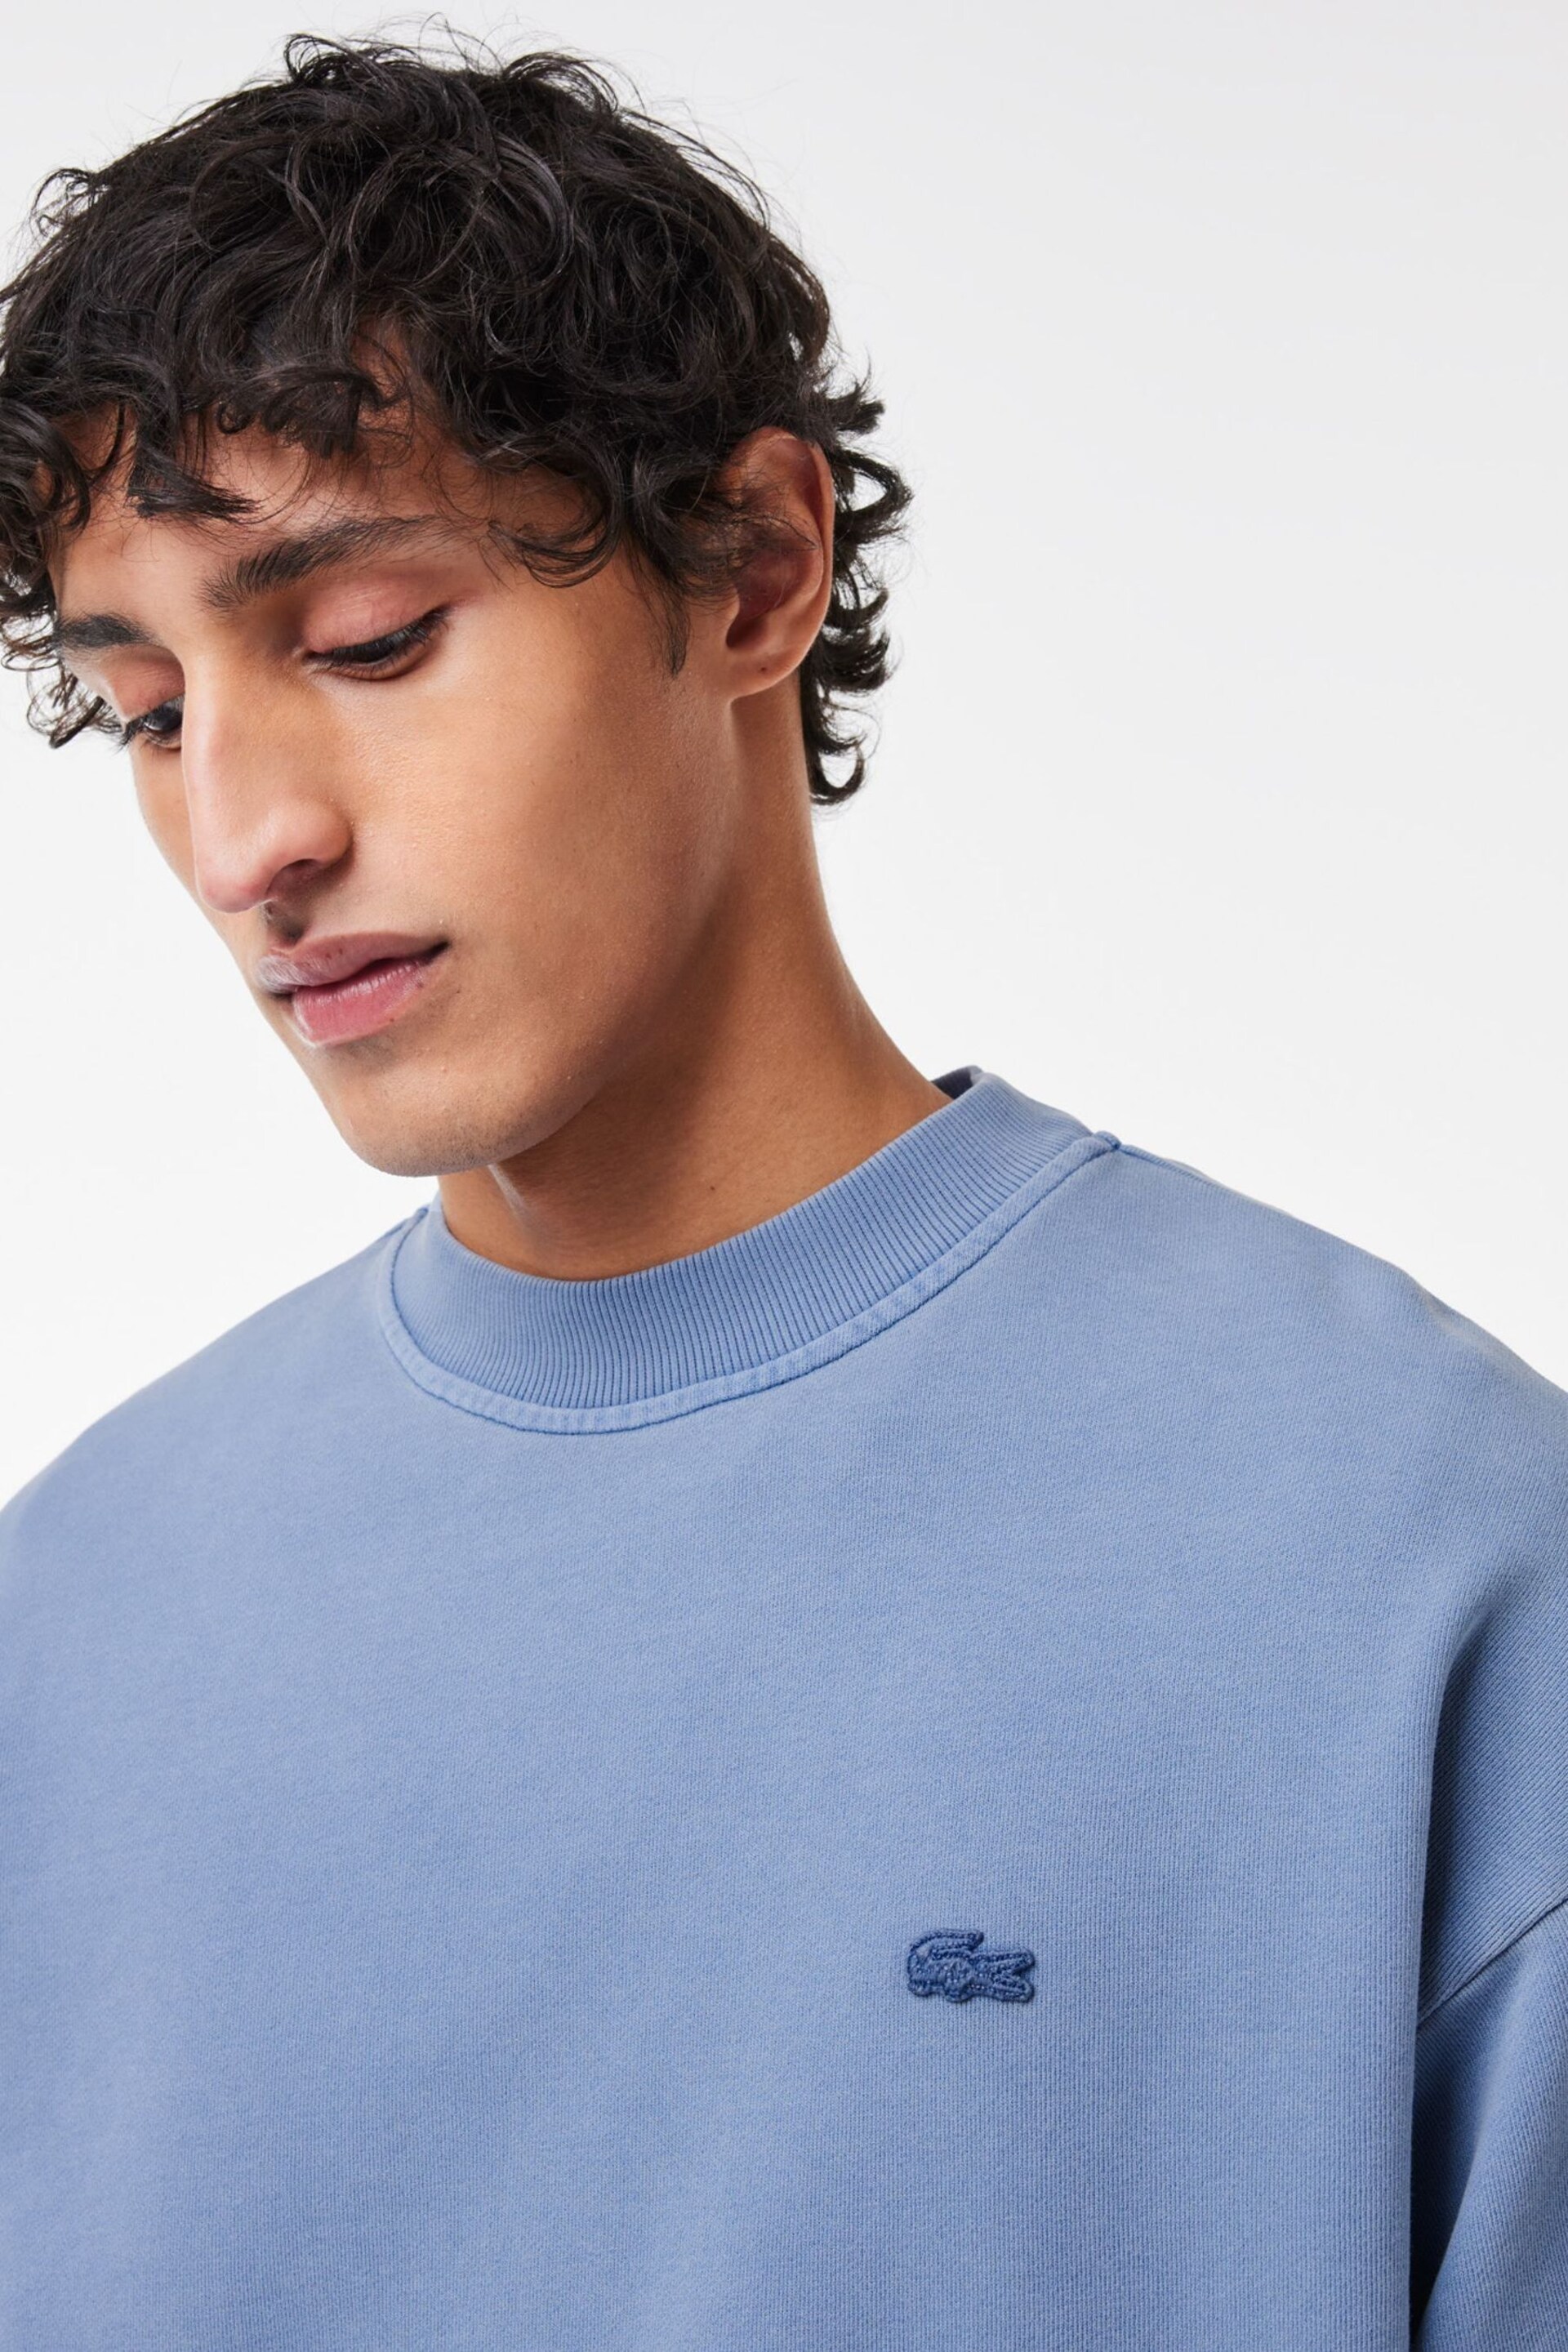 Lacoste Relaxed Fit Tonal Logo Jersey Sweatshirt - Image 3 of 6